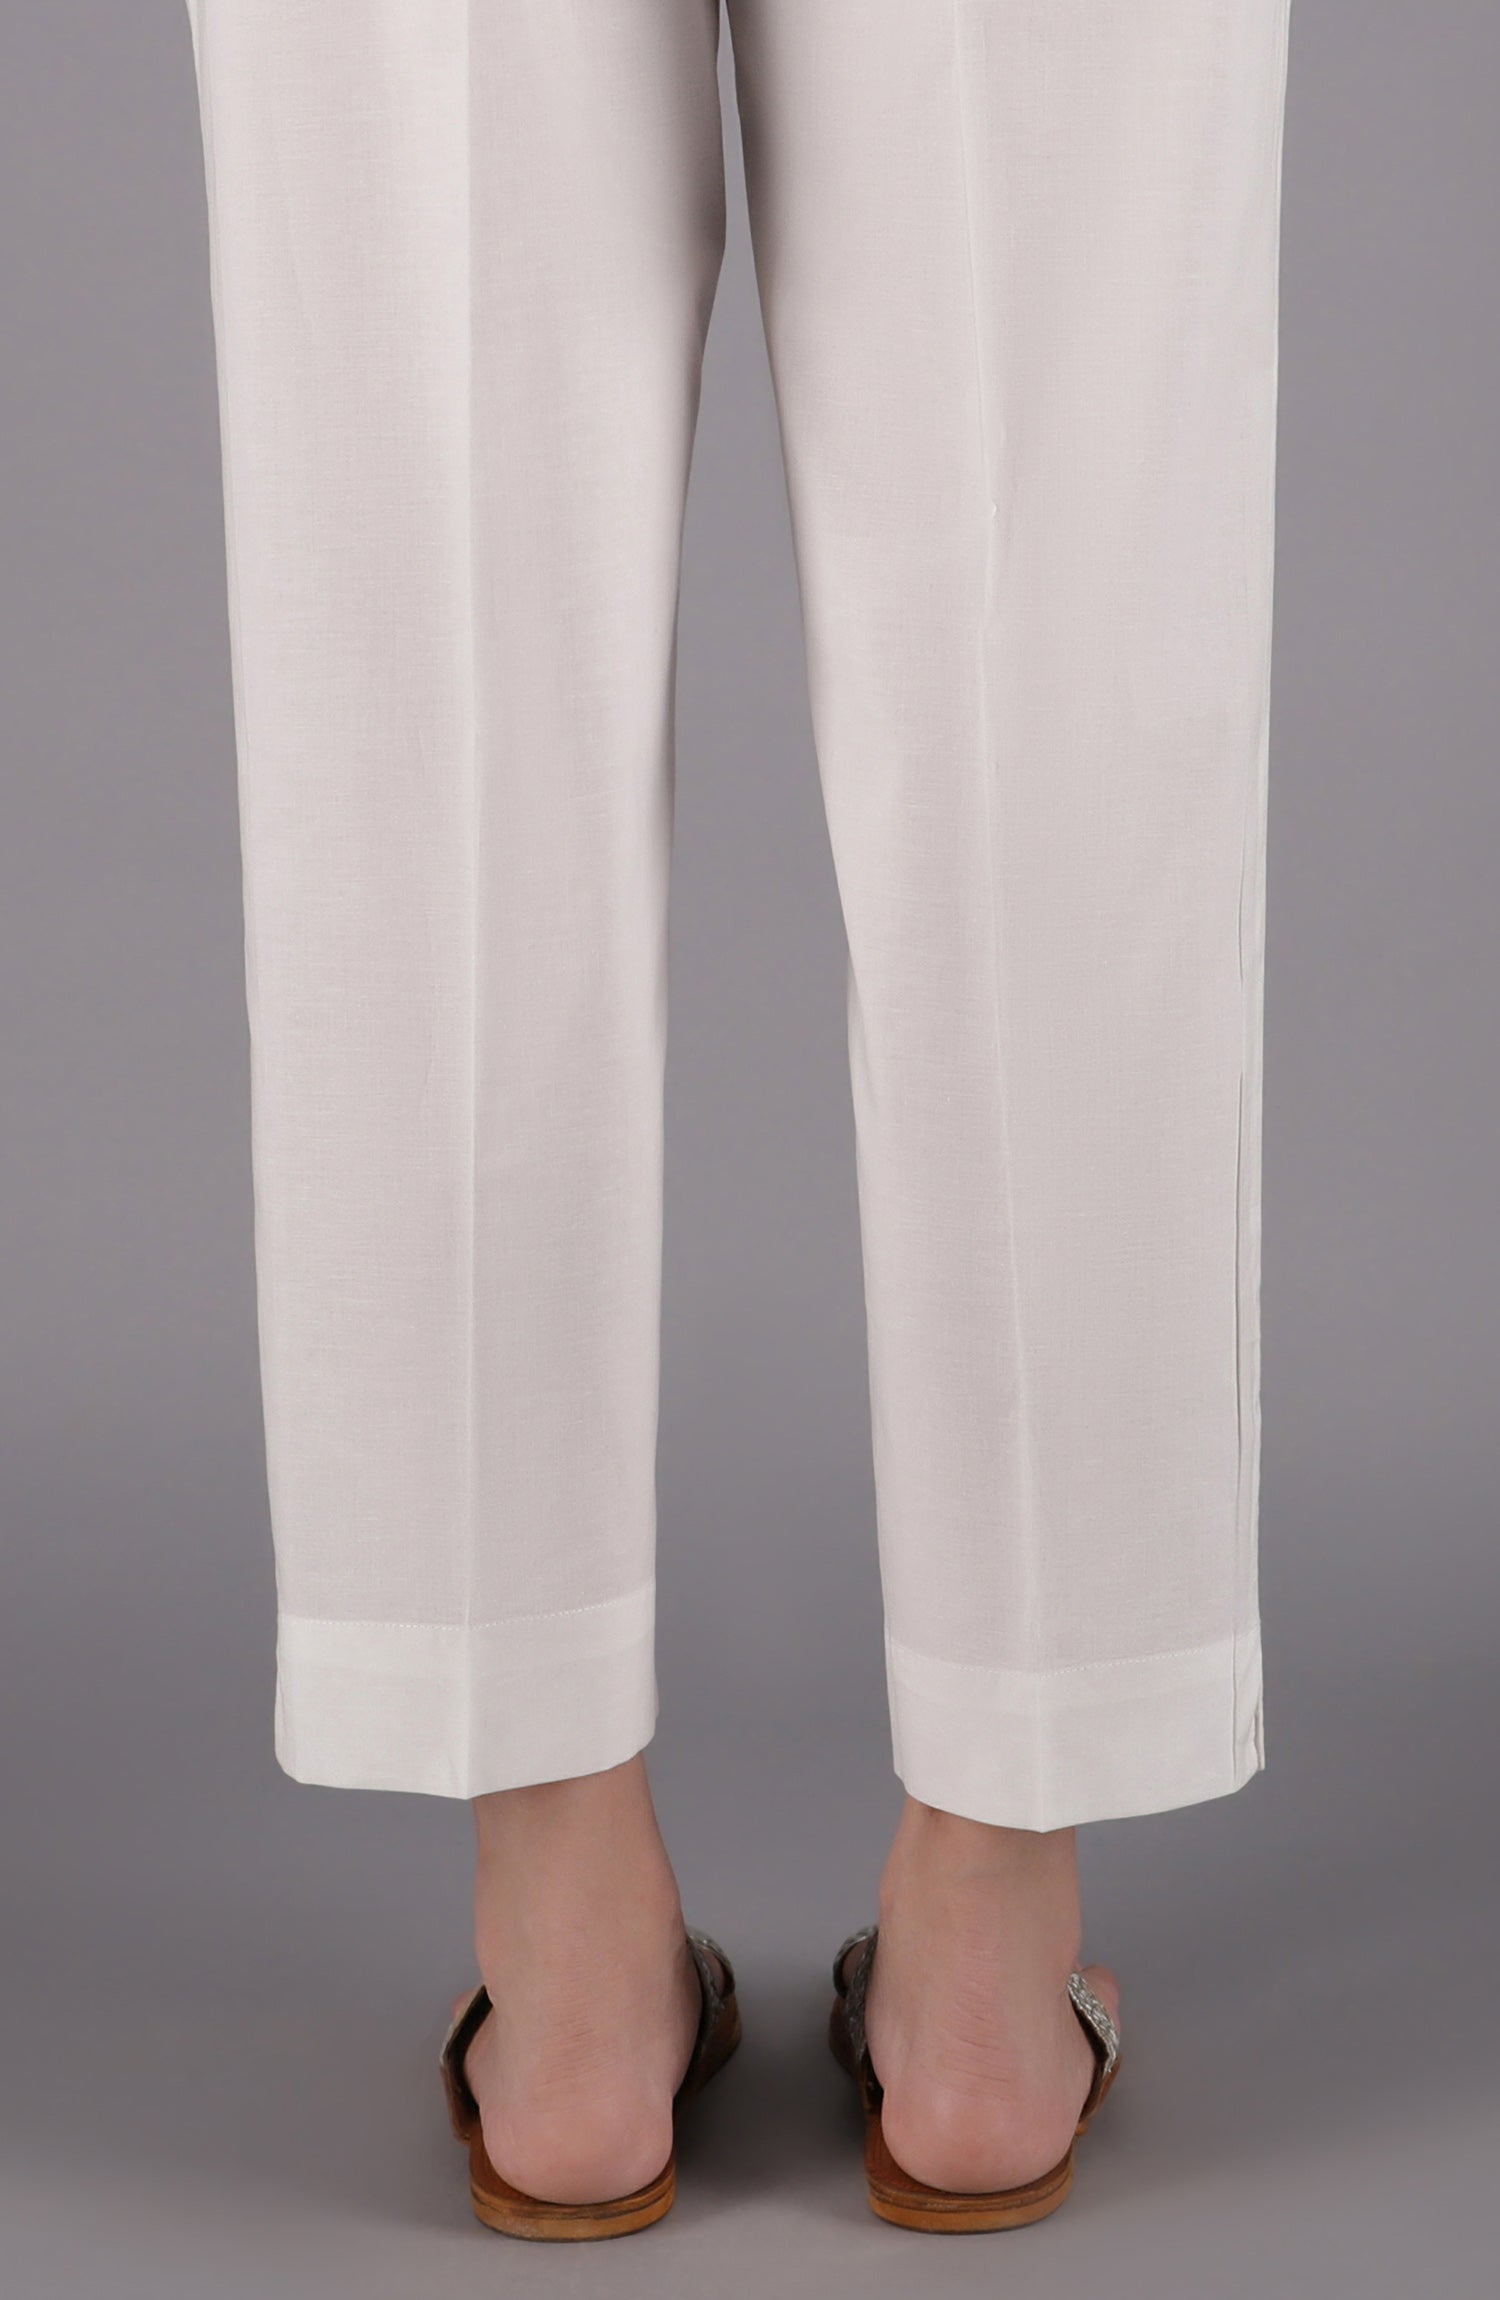 NRP-97/S WHITE CAMBRIC SCPANTS STITCHED BOTTOMS PANTS